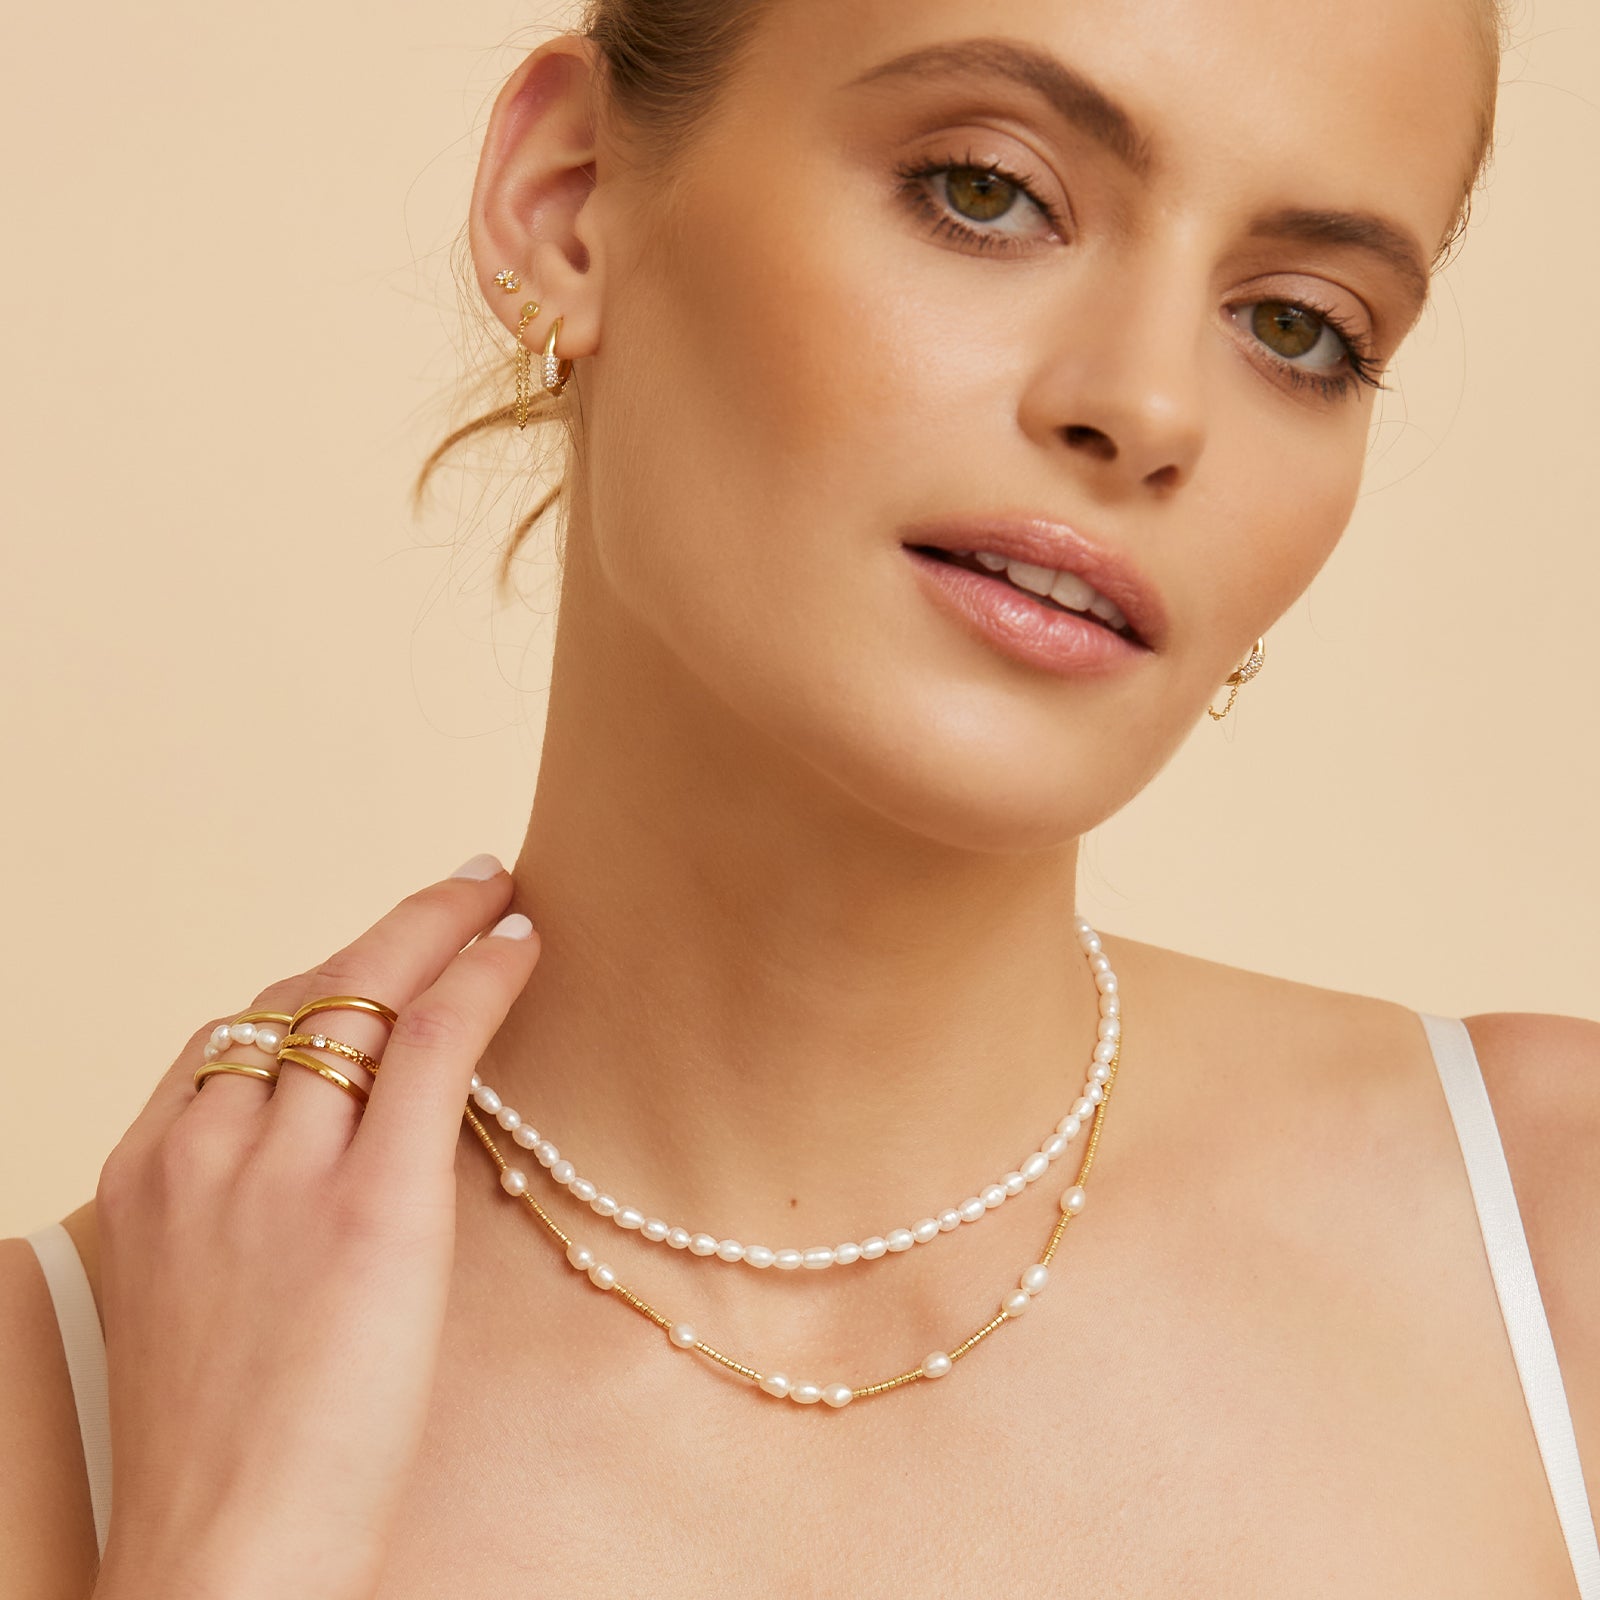 Arms Of Eve white Romeo pearl choker with a gold clasp, exuding elegance and sophistication